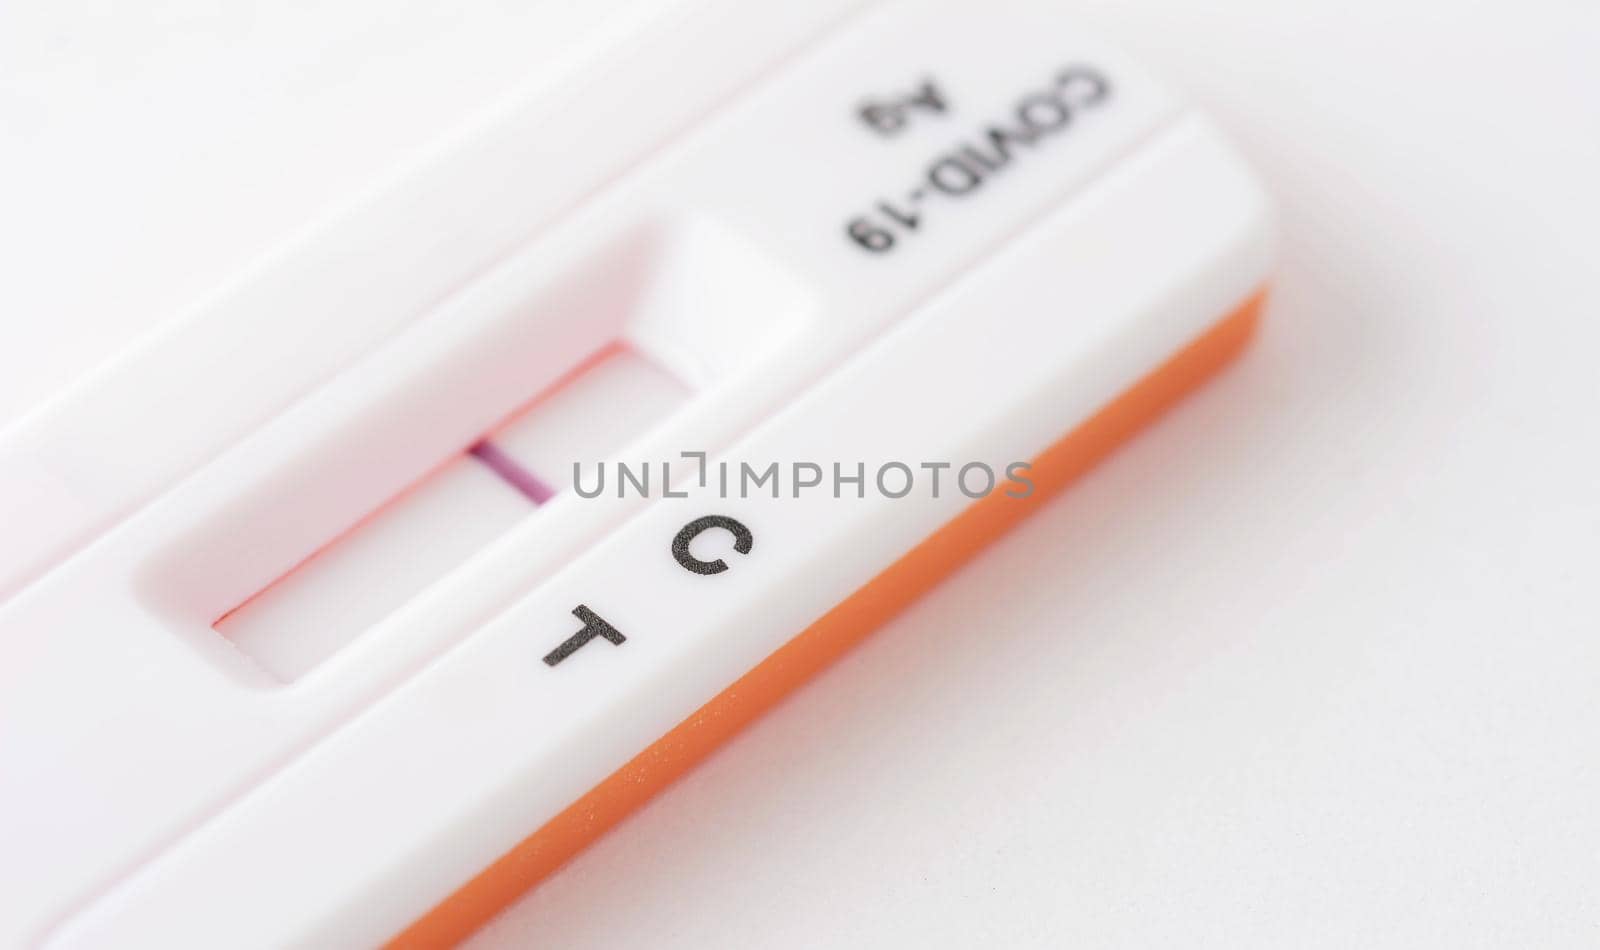 Home antigen test for capturing of COVID-19 antibodies on white background. It shows negative result. 